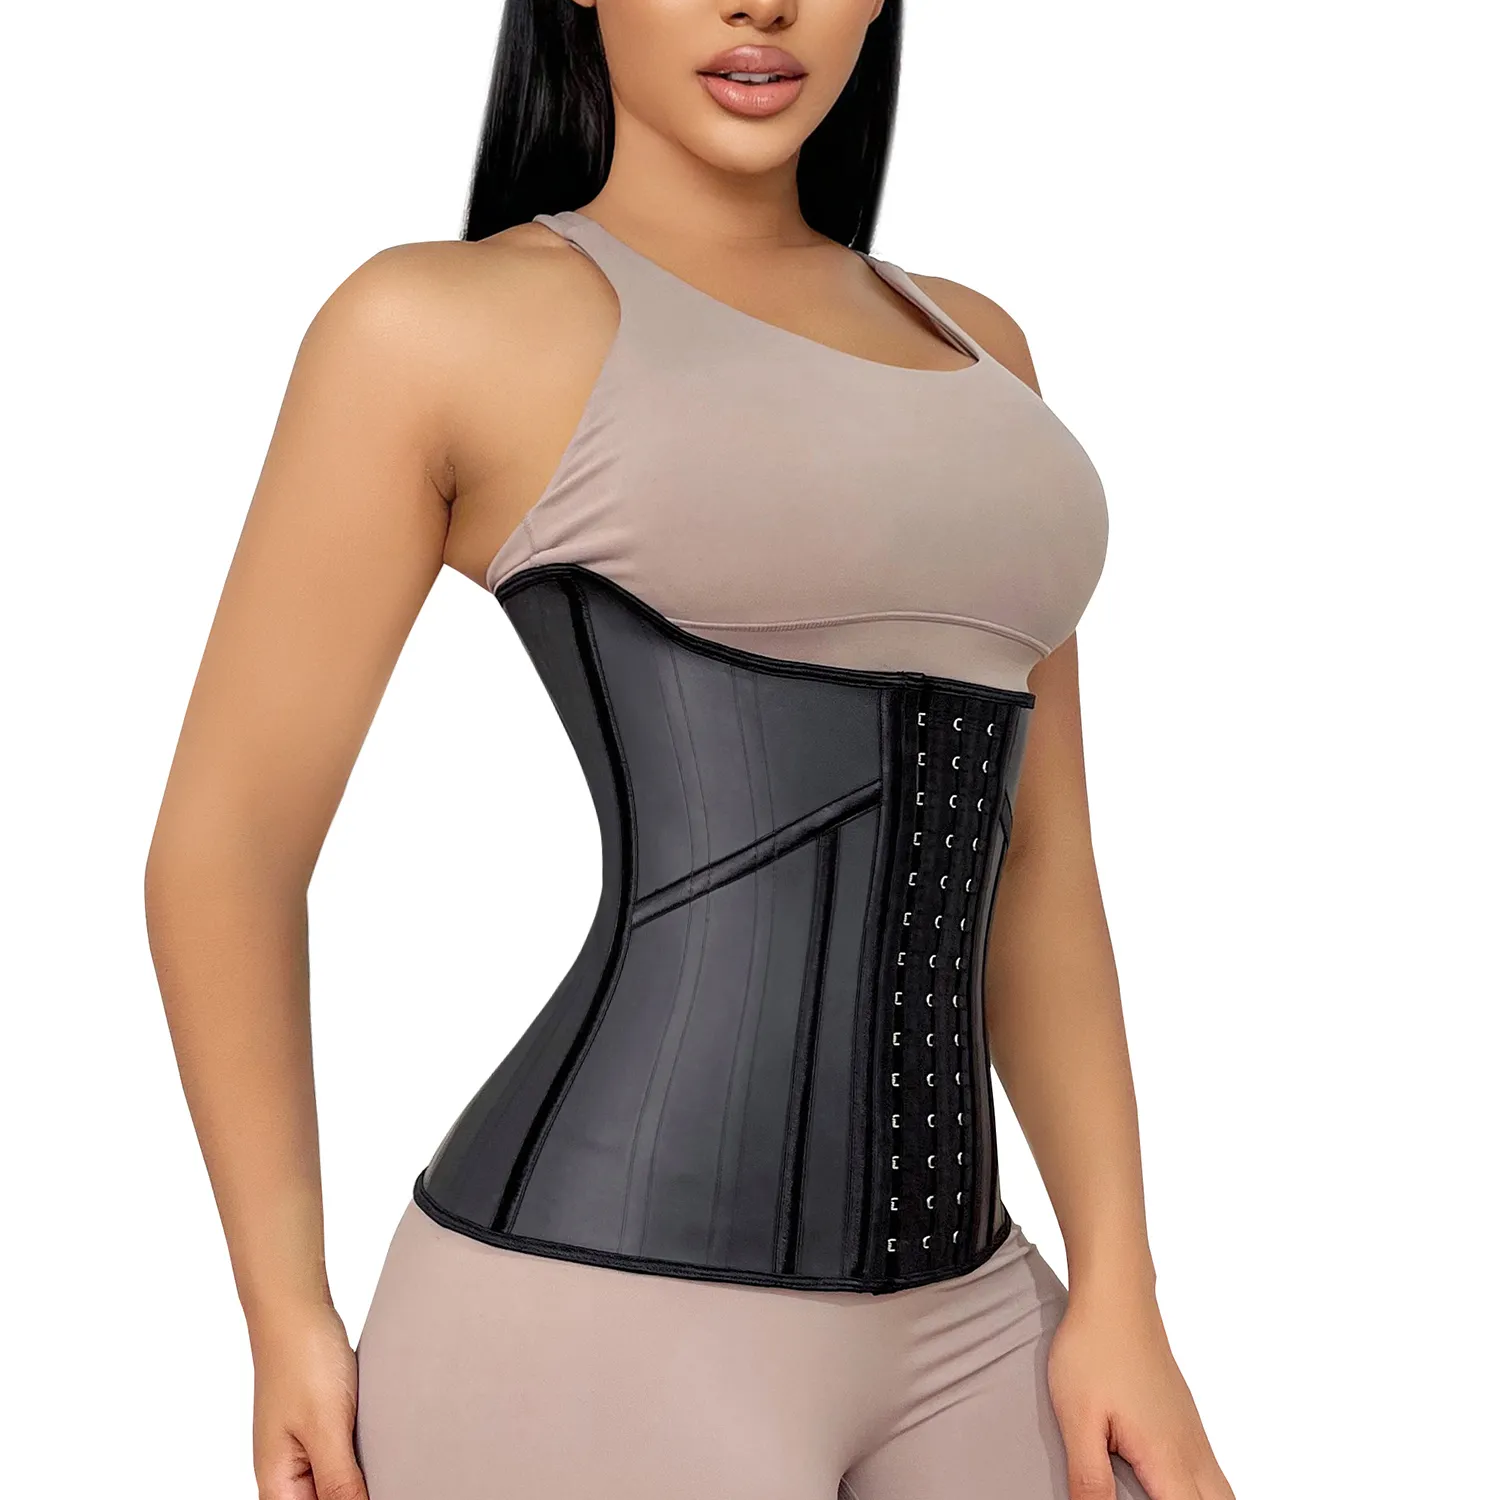 Plus Size Hourglass Waist Trainer Corset Belt With Latex Underbust And  Reducing Girdle Slimming Wa Stomach Shaper Corset With 21 Steel Bones  230818 From Zhengrui03, $24.98